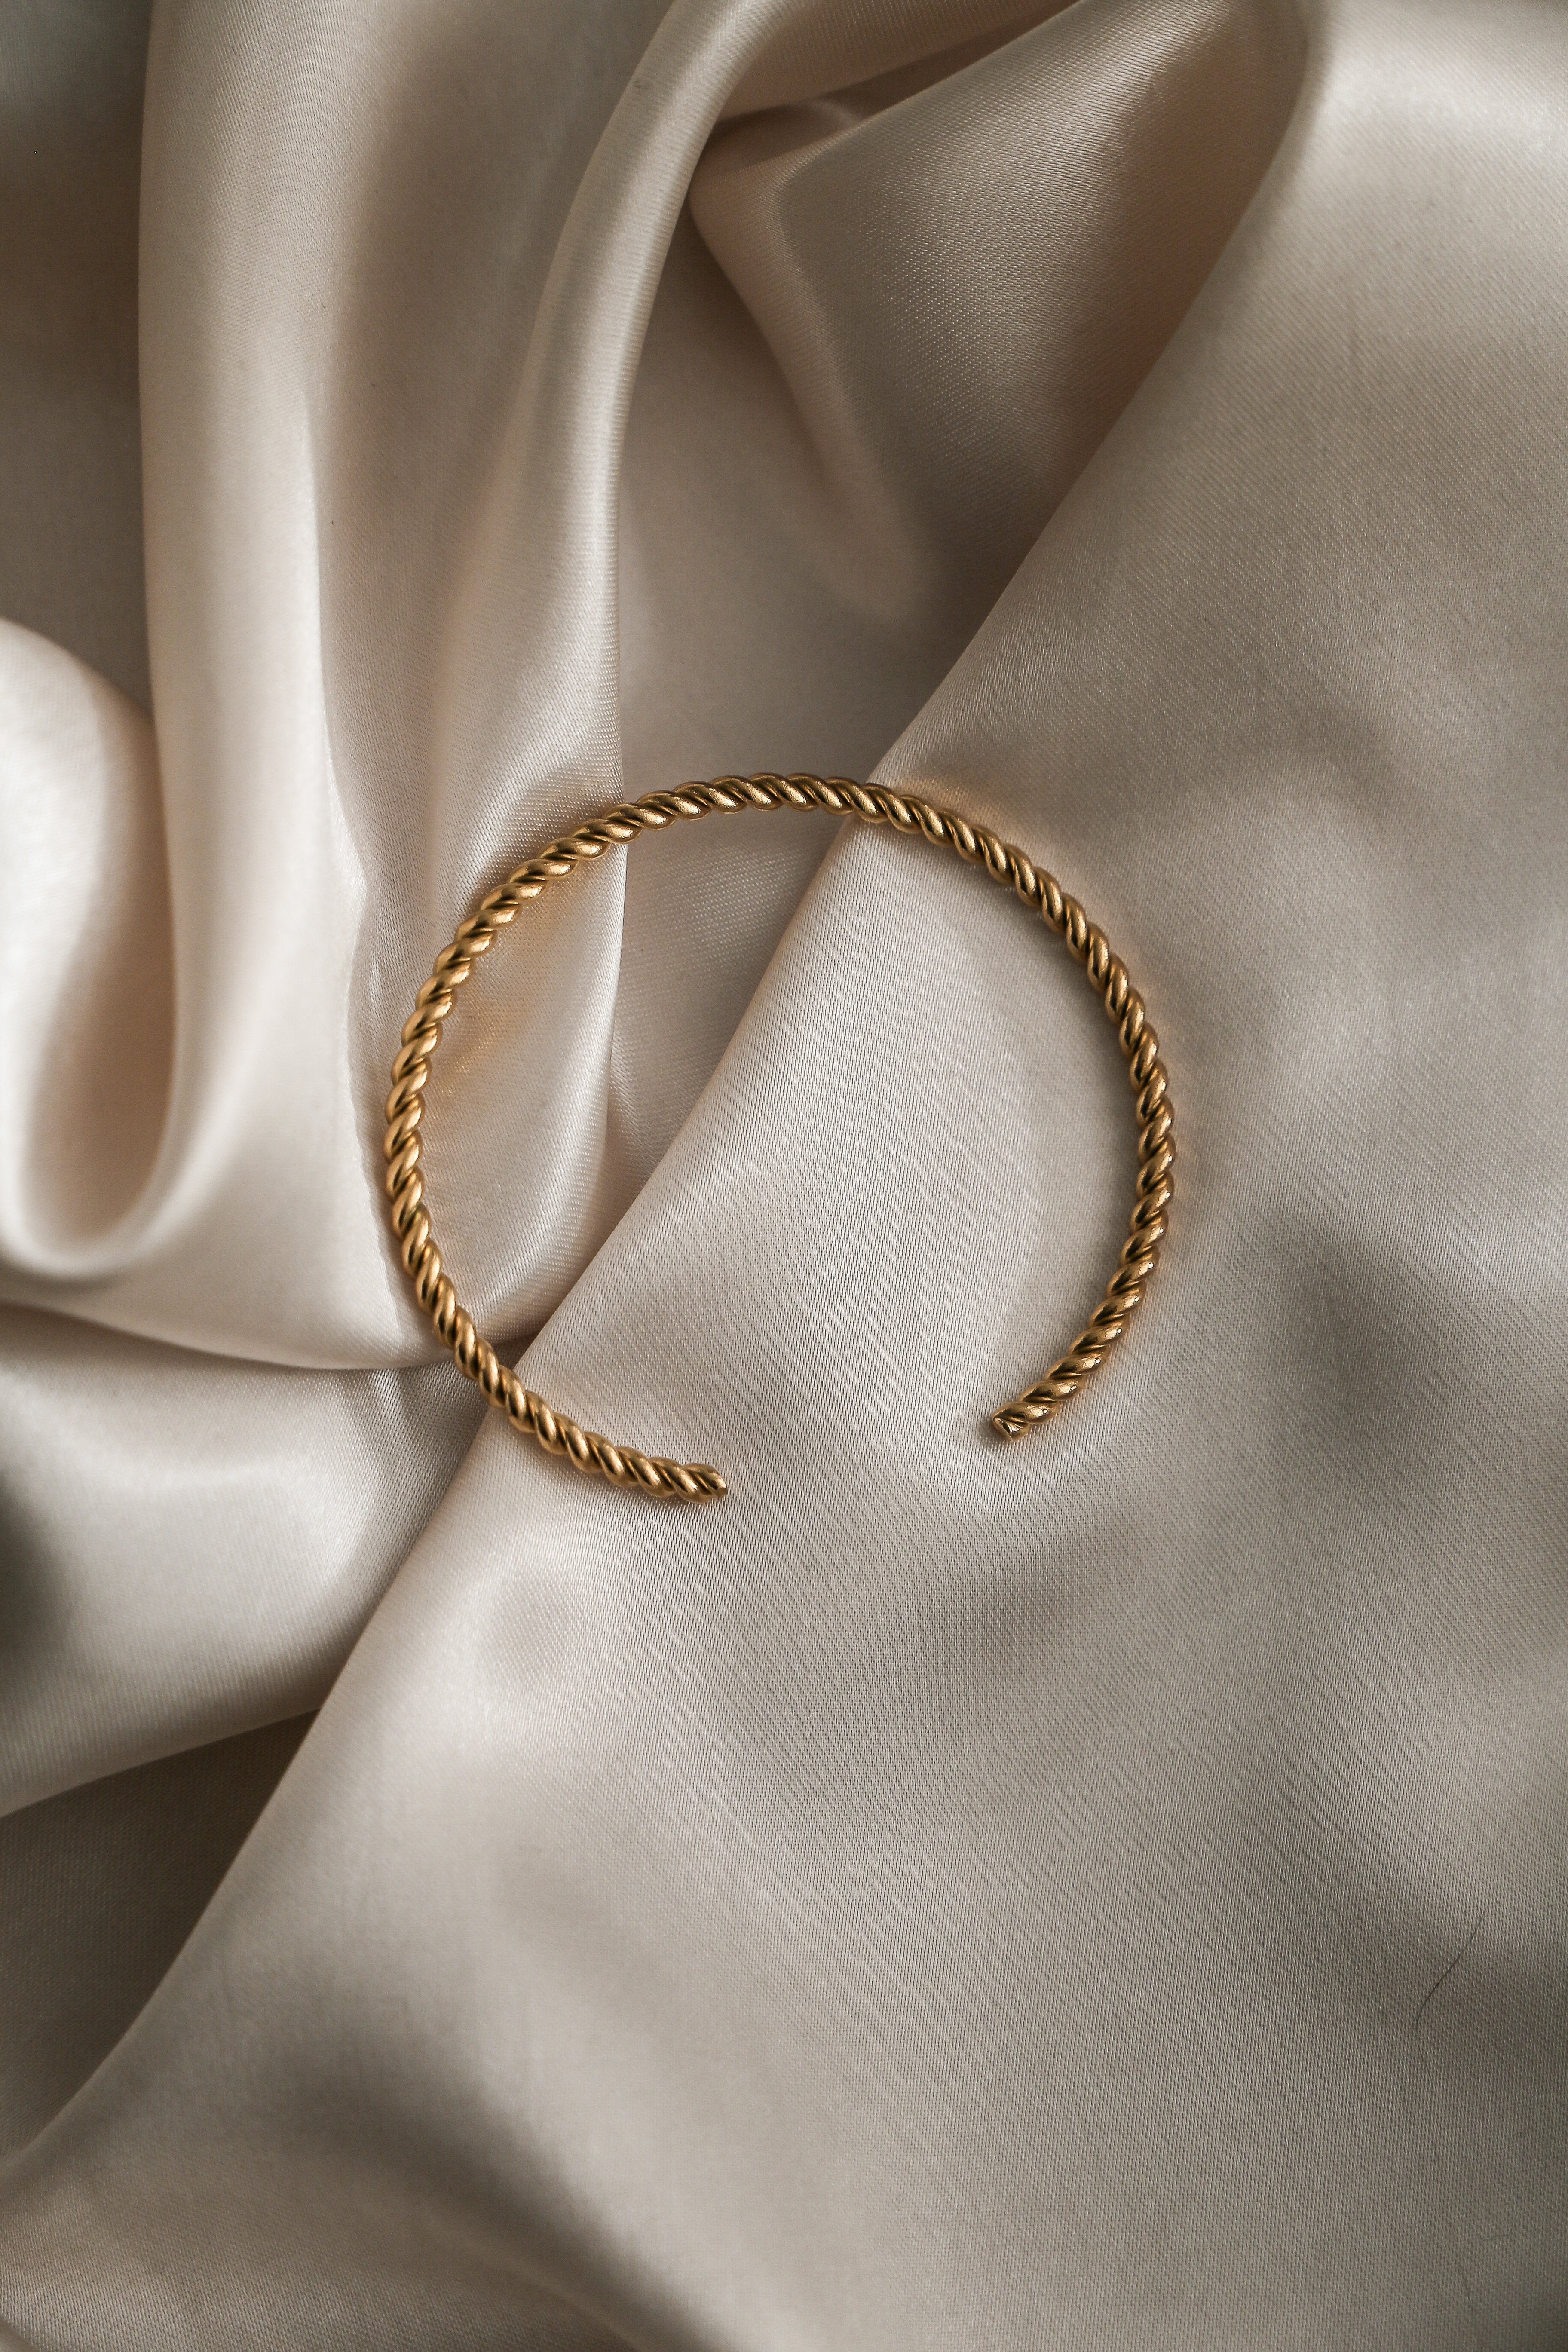 Camilla Cuff - Boutique Minimaliste has waterproof, durable, elegant and vintage inspired jewelry